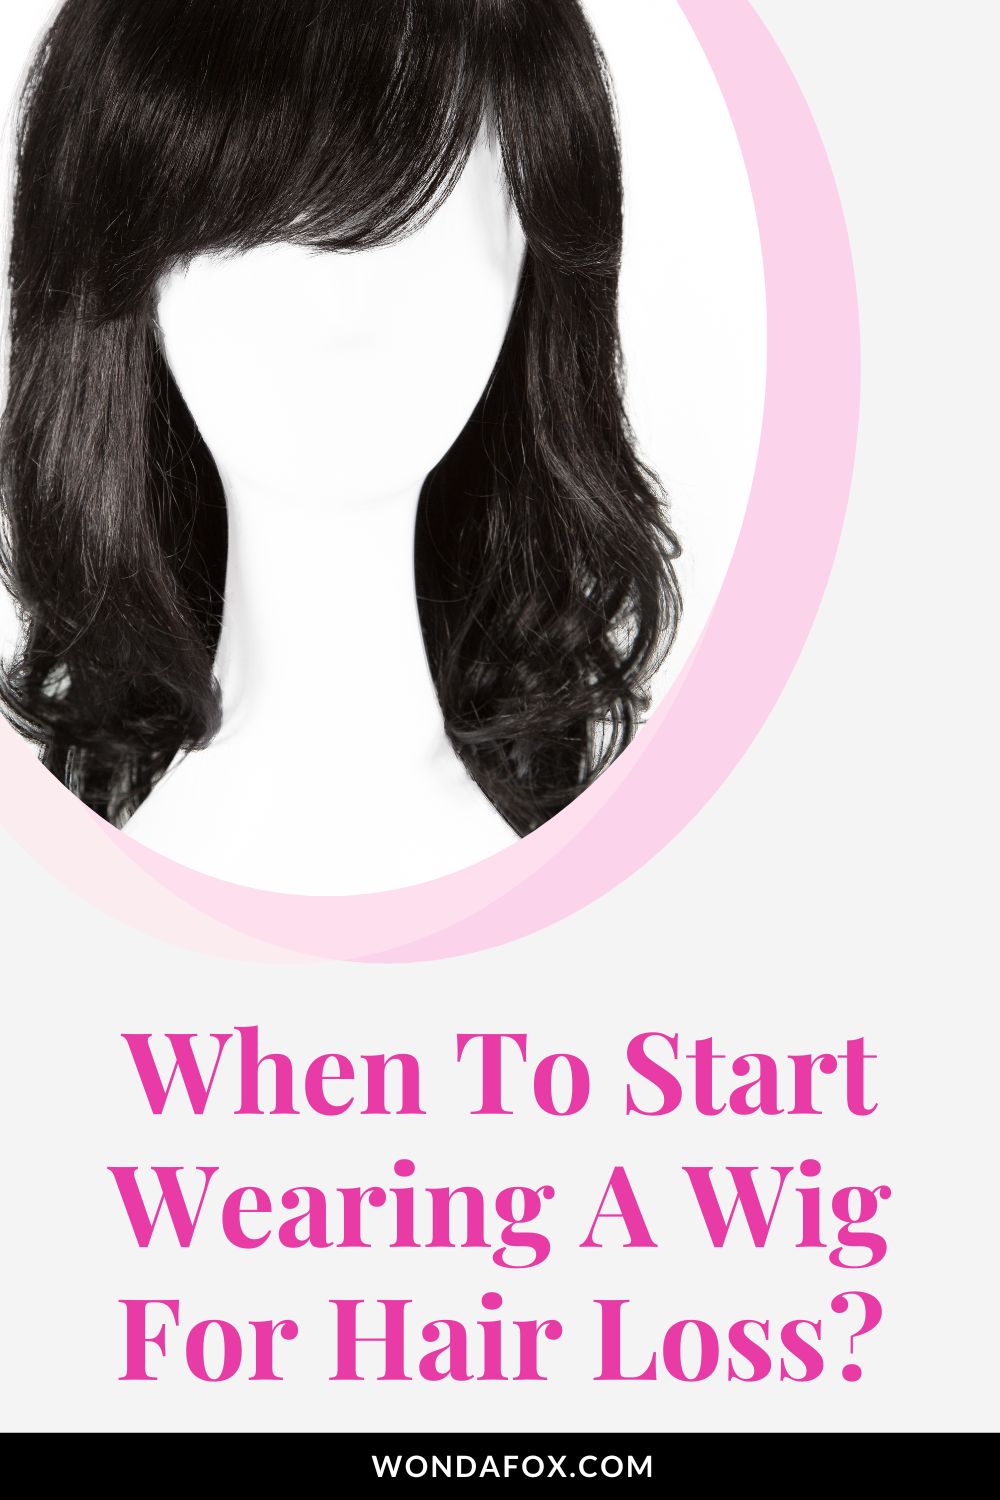 When Should I Start Wearing A Wig For Hair Loss?